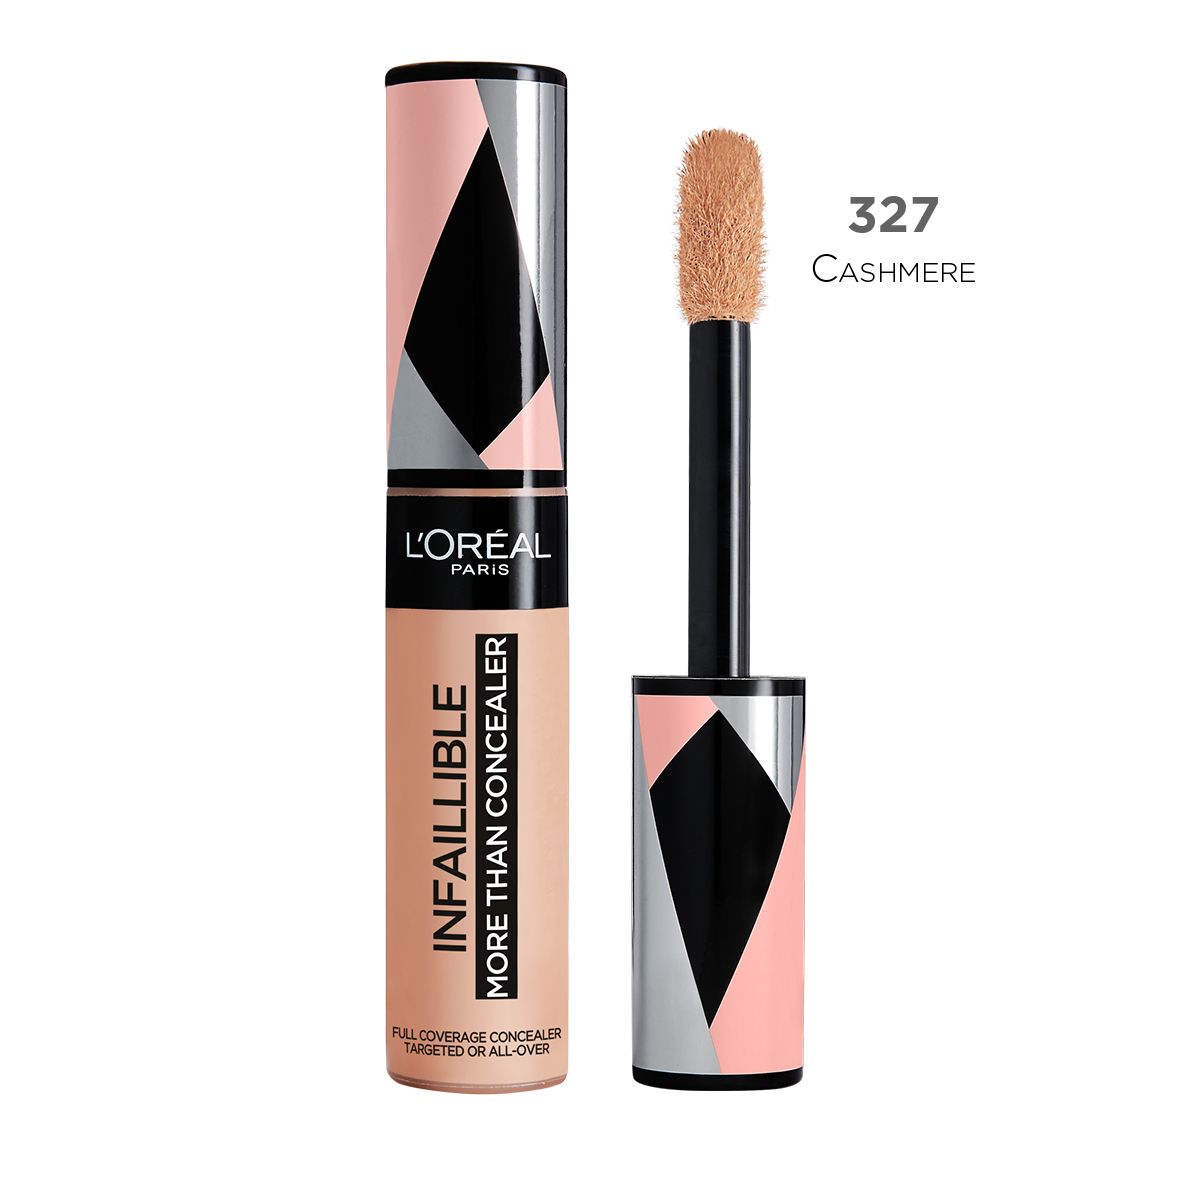 L'Oreal More Than Concealer 327 Cashmere Correttore